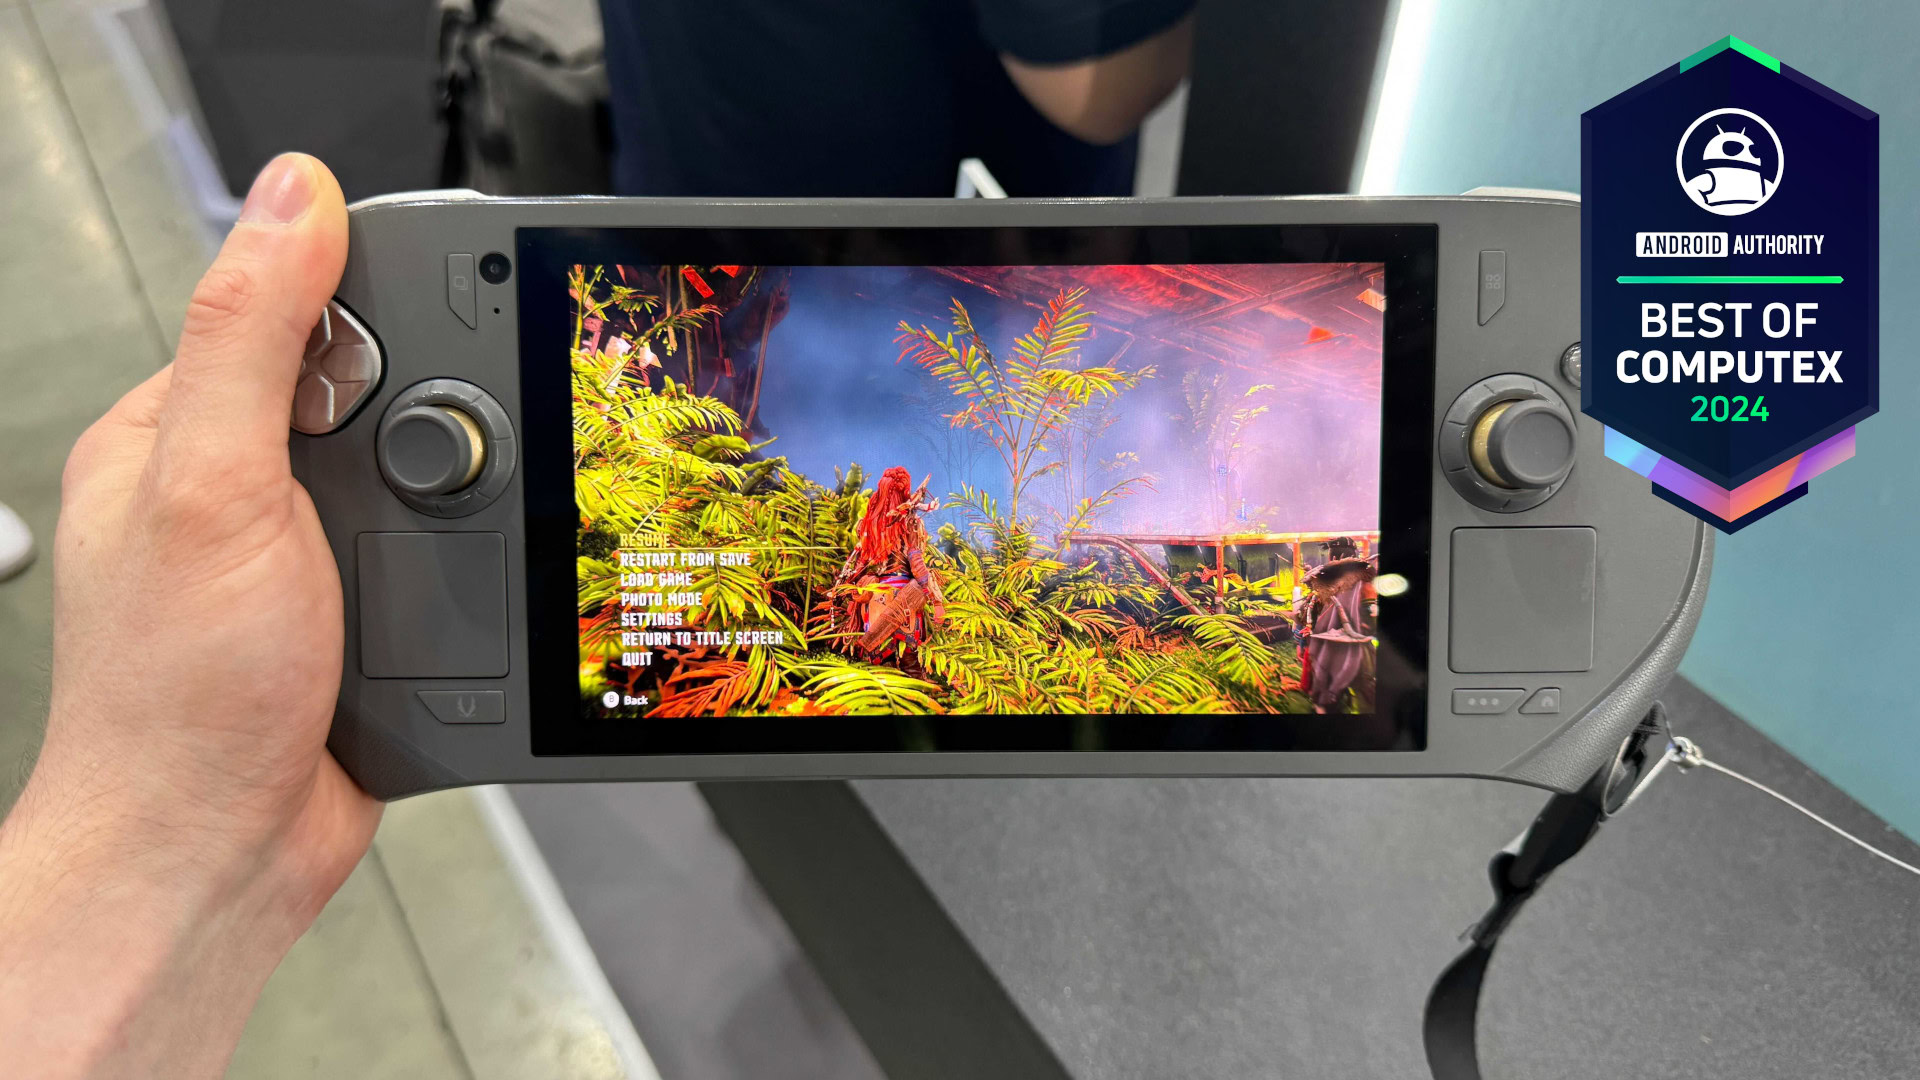 The ZOTAC Zone gaming handheld on the show floor at Computex.